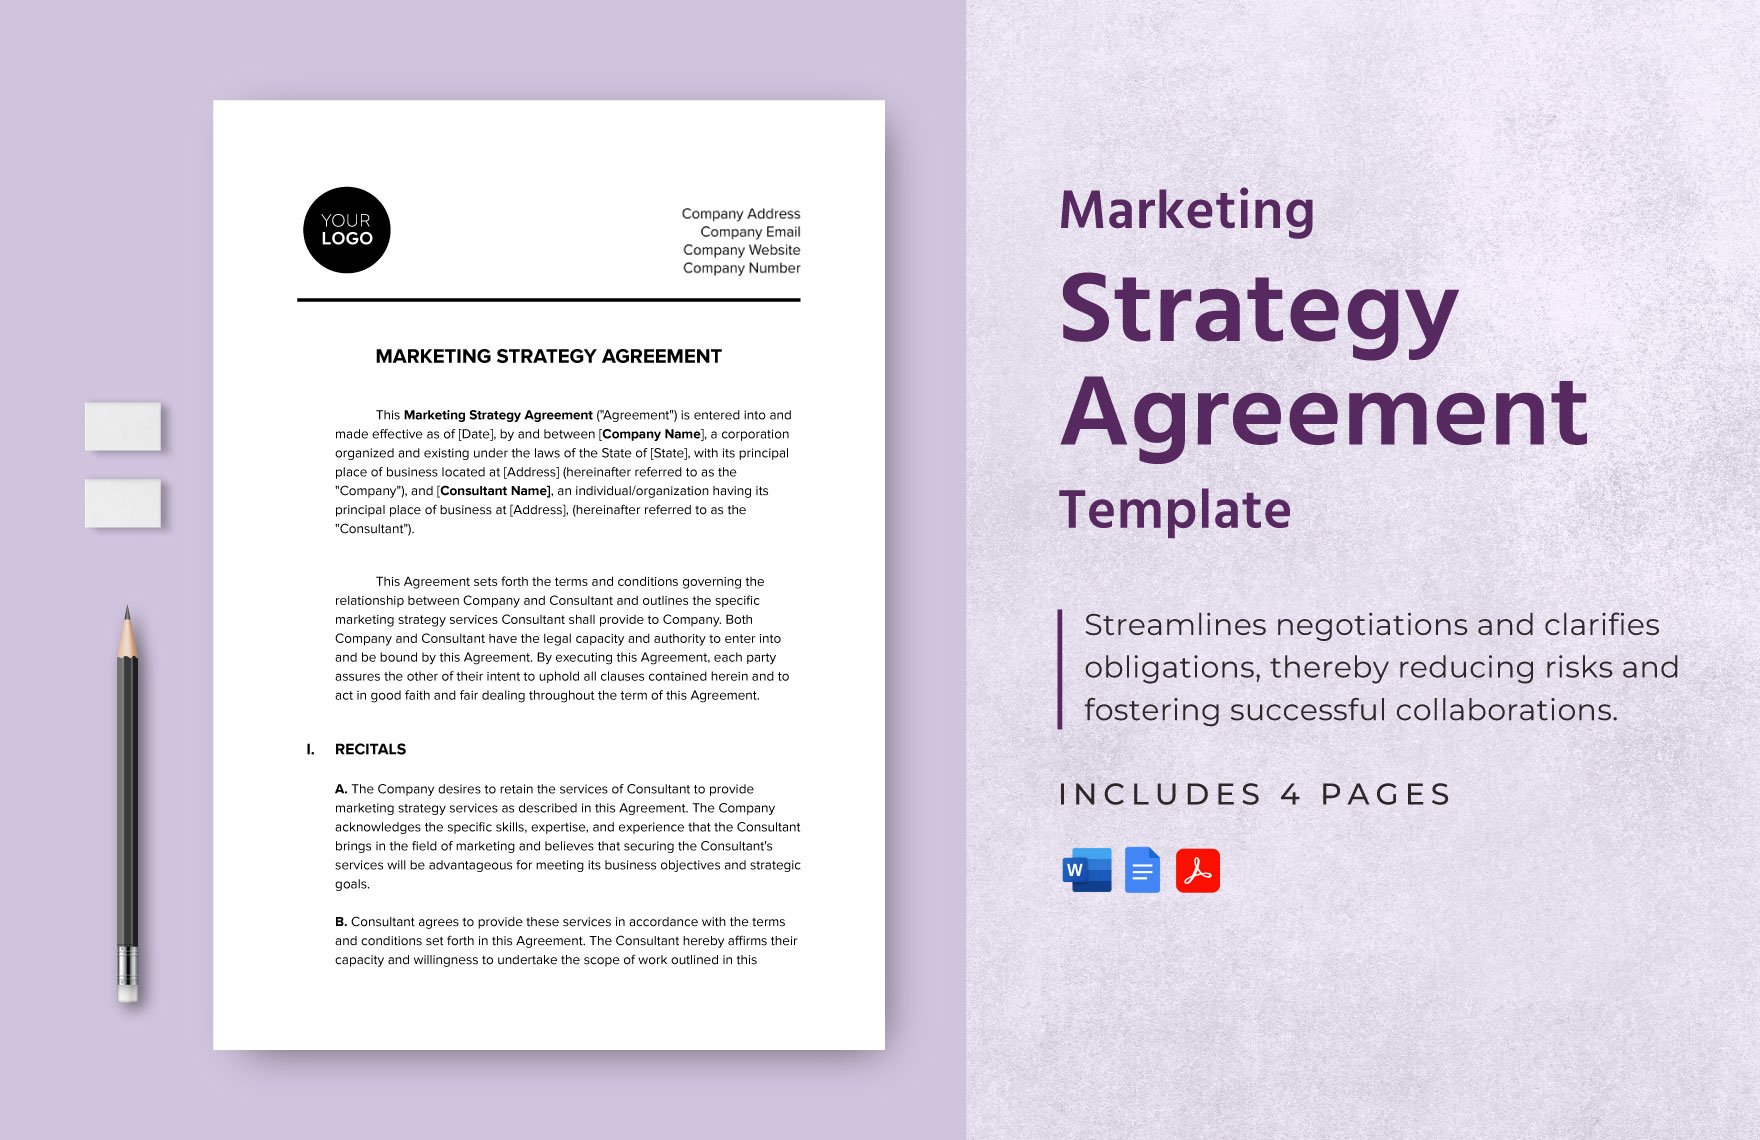 Marketing Strategy Agreement Template